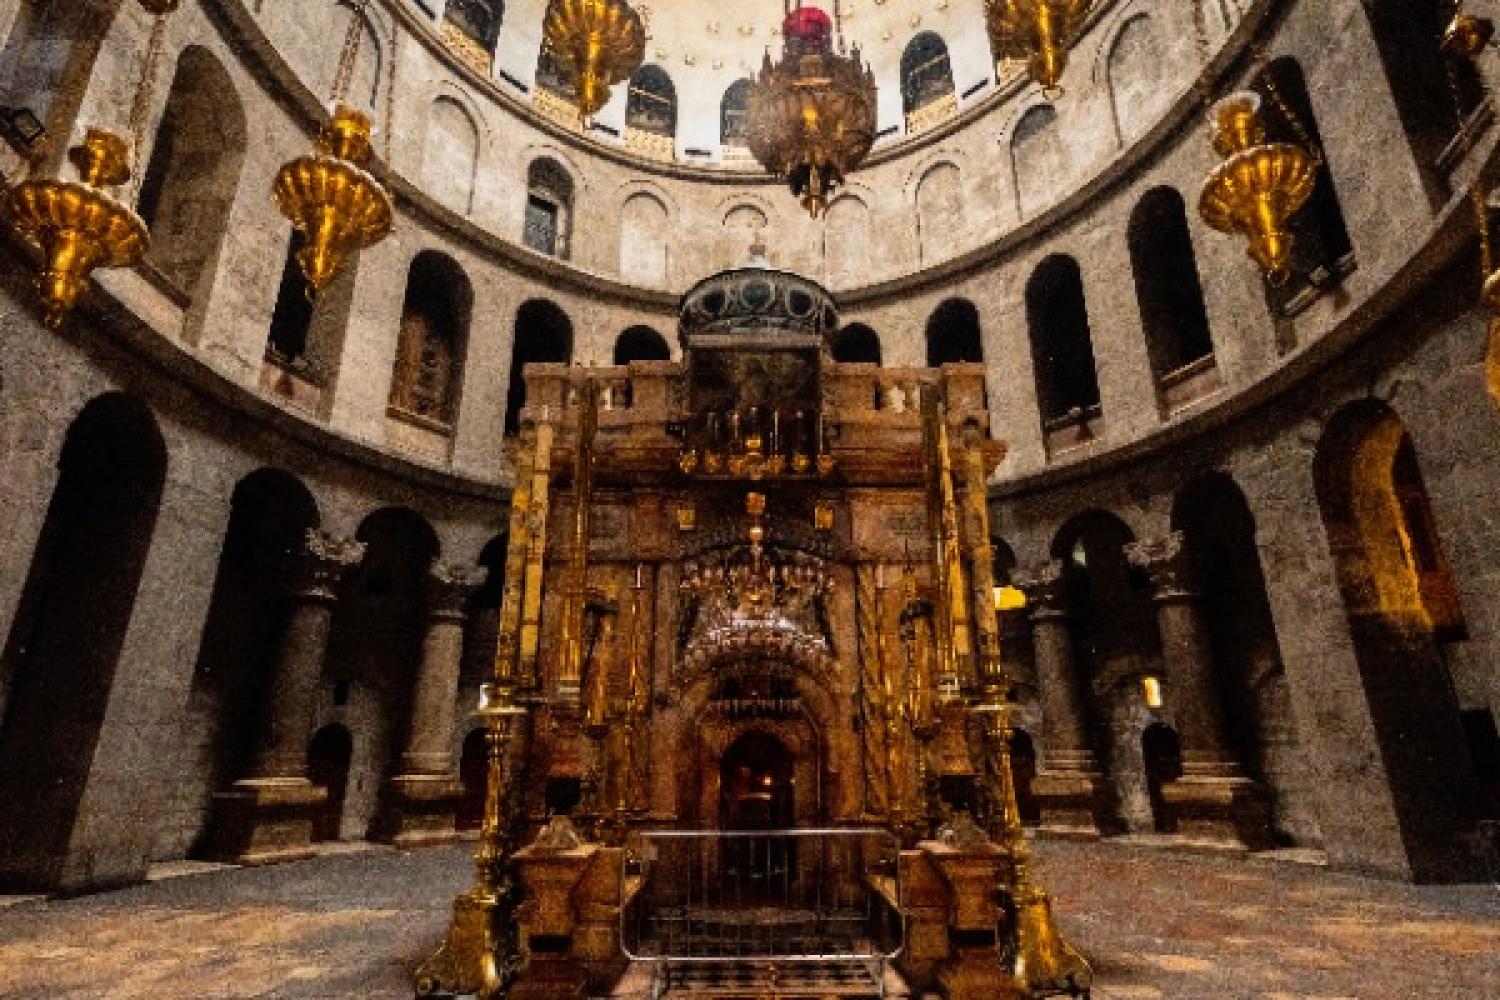 The interior of the Church of the Holy Sepulchre, Jerusalem